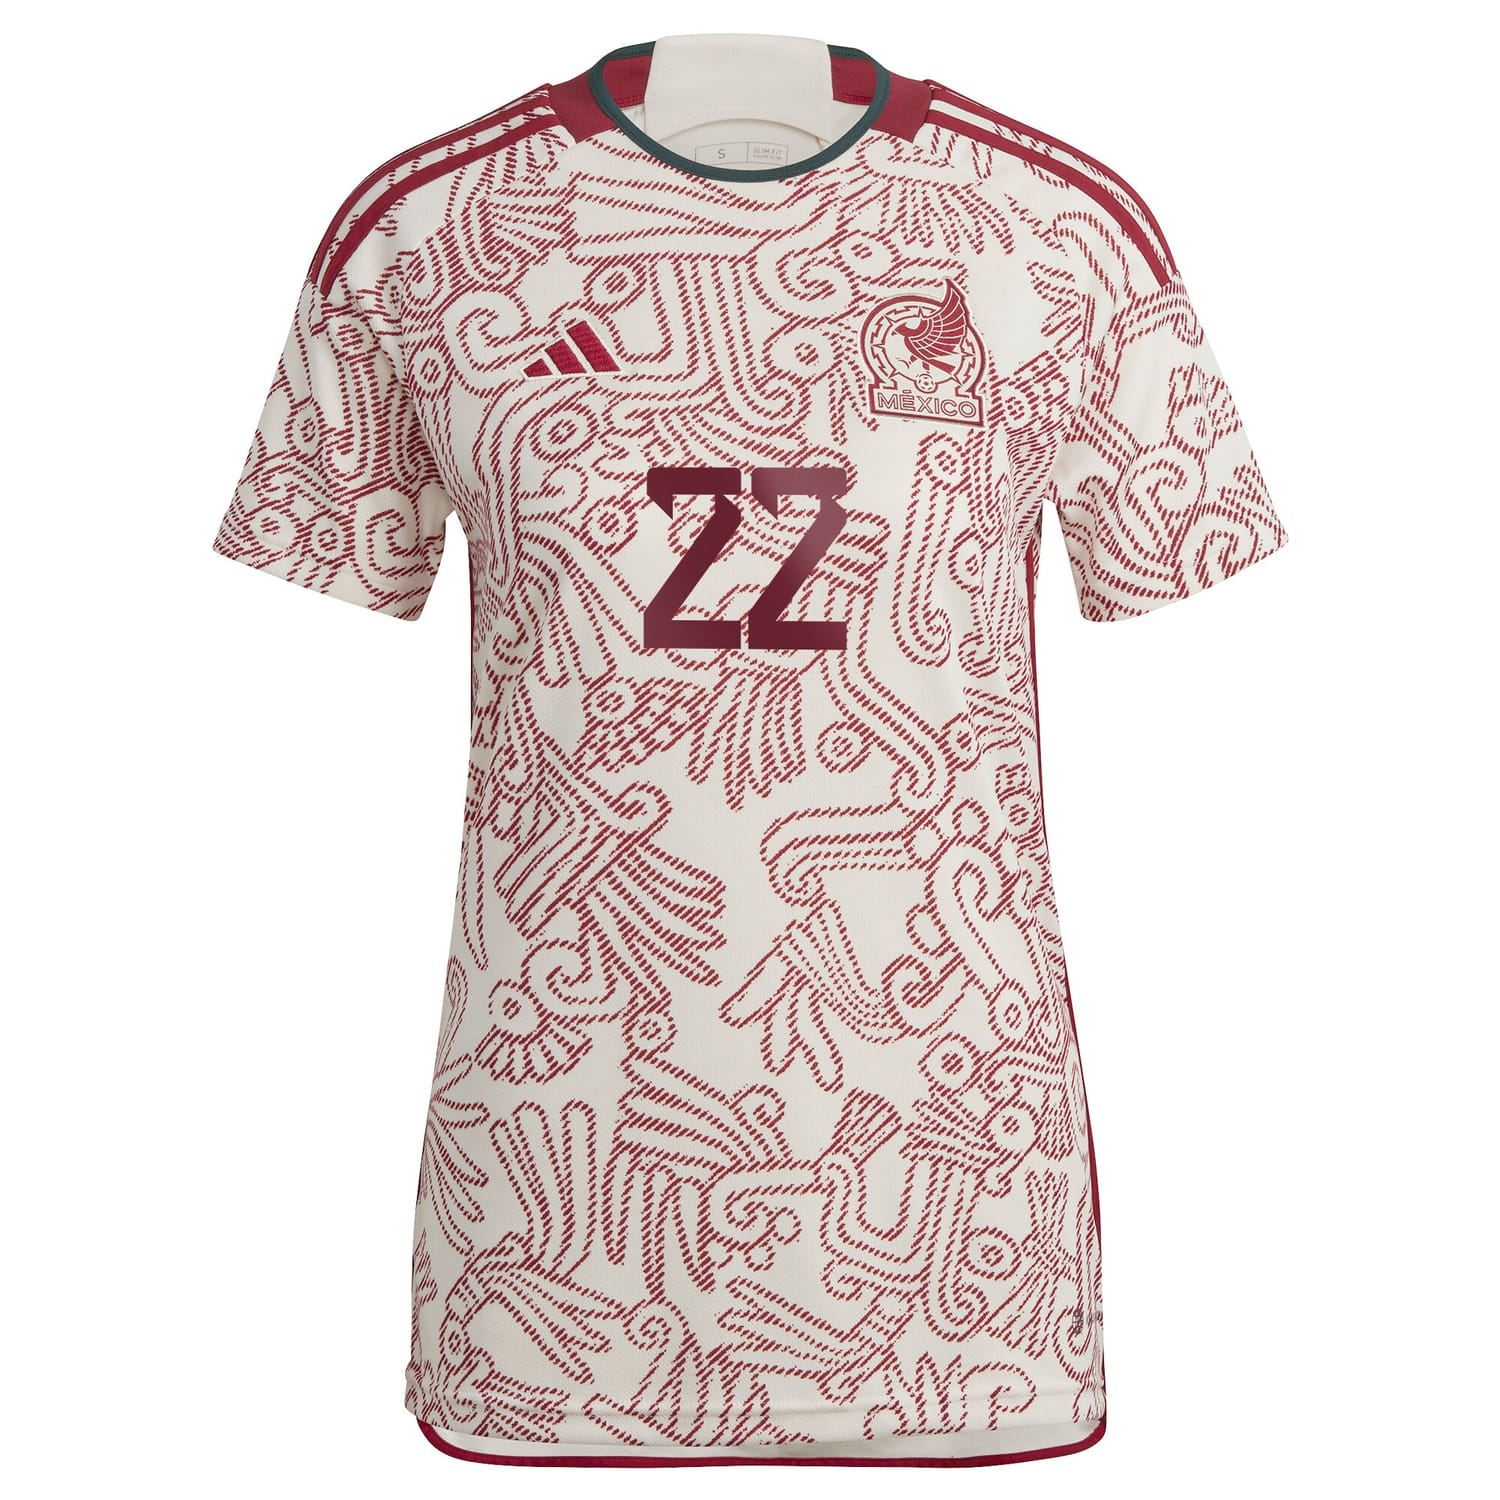 Mexico National Team Away Jersey Shirt White 2022-23 player Hirving Lozano printing for Women